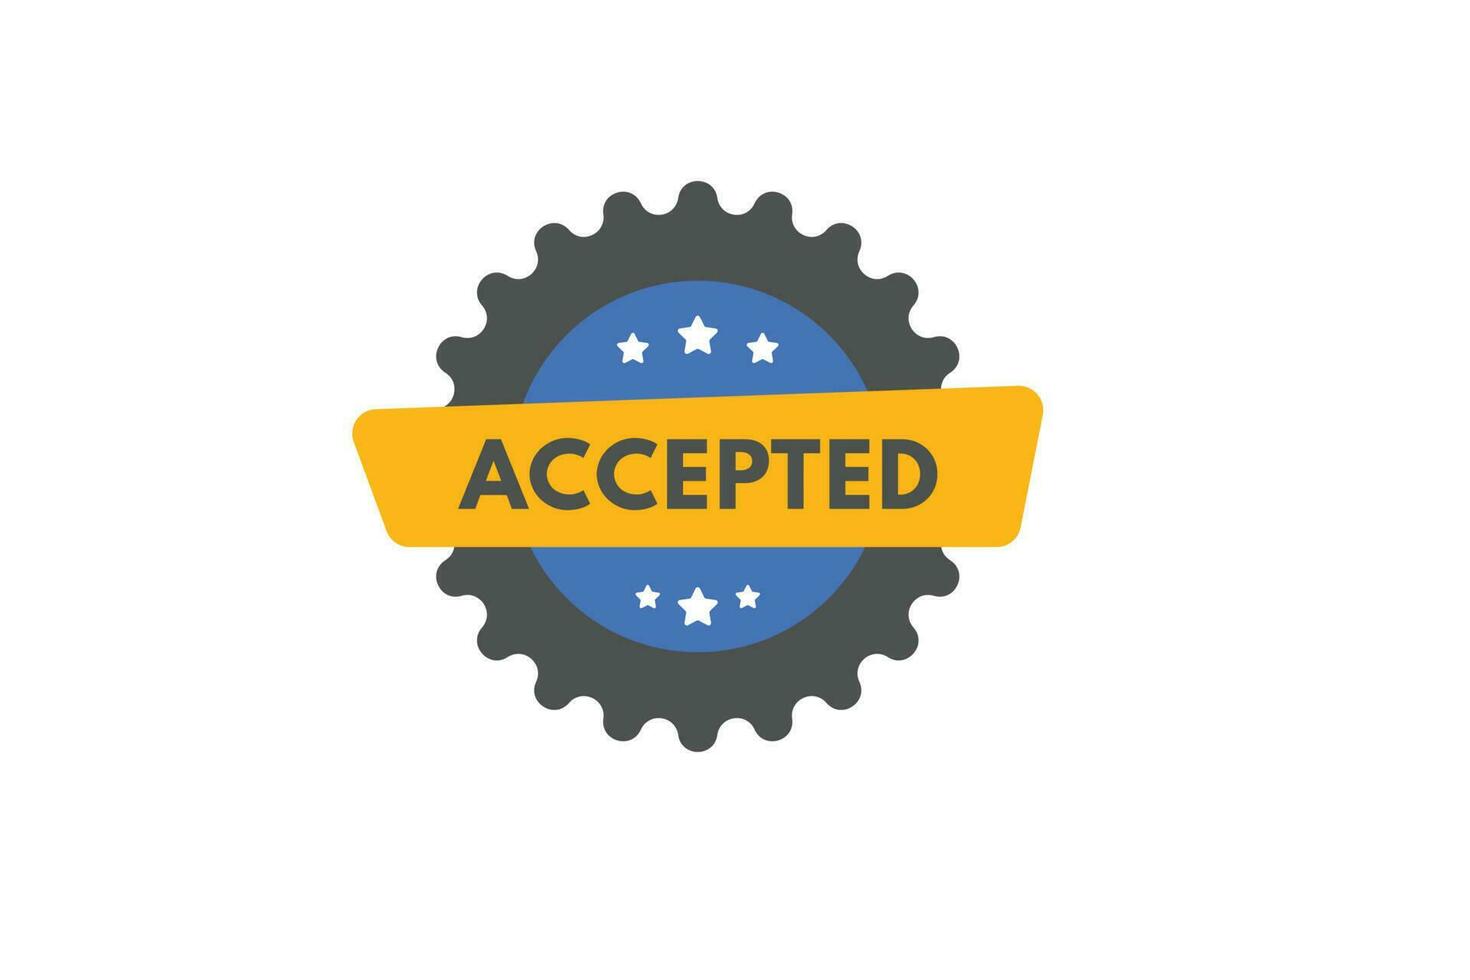 Accepted text Button. Accepted Sign Icon Label Sticker Web Buttons vector